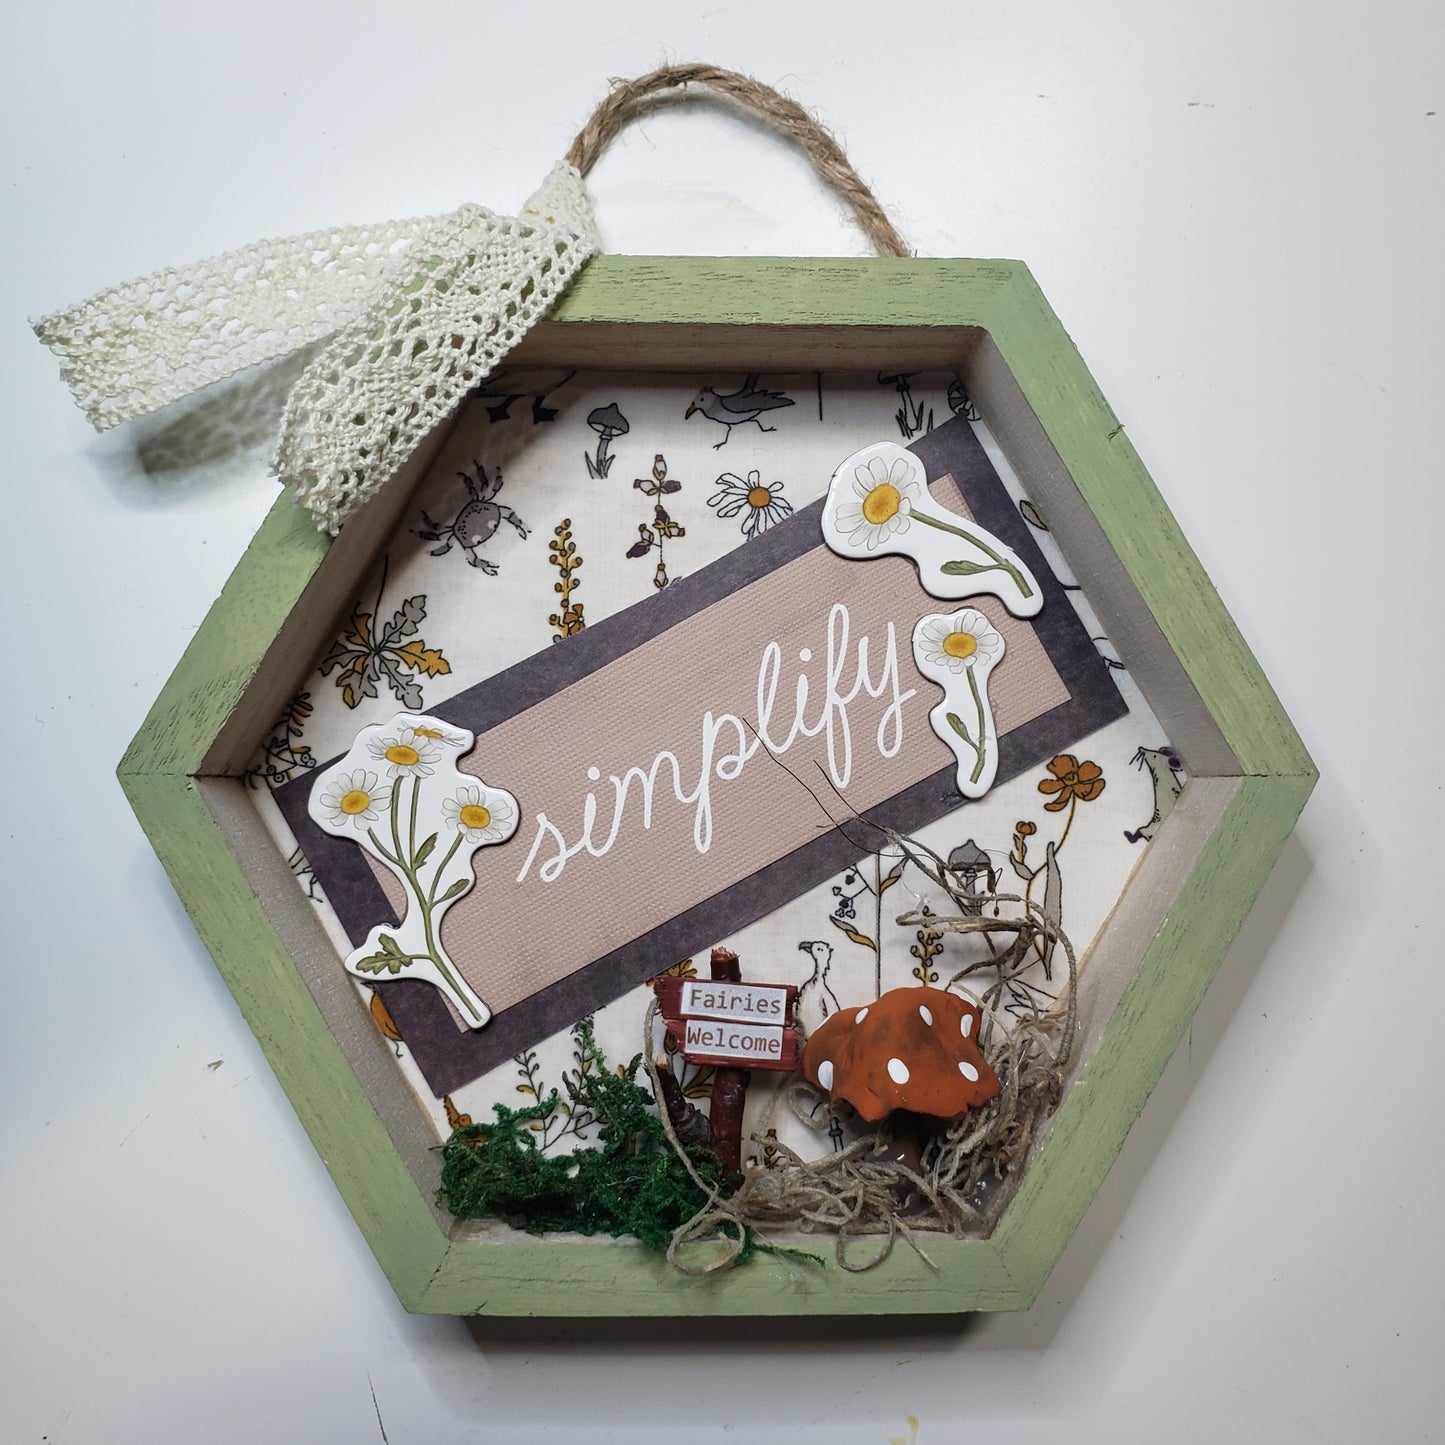 "Simplify in a field of Daisies" Wooden Floral Shadow Box